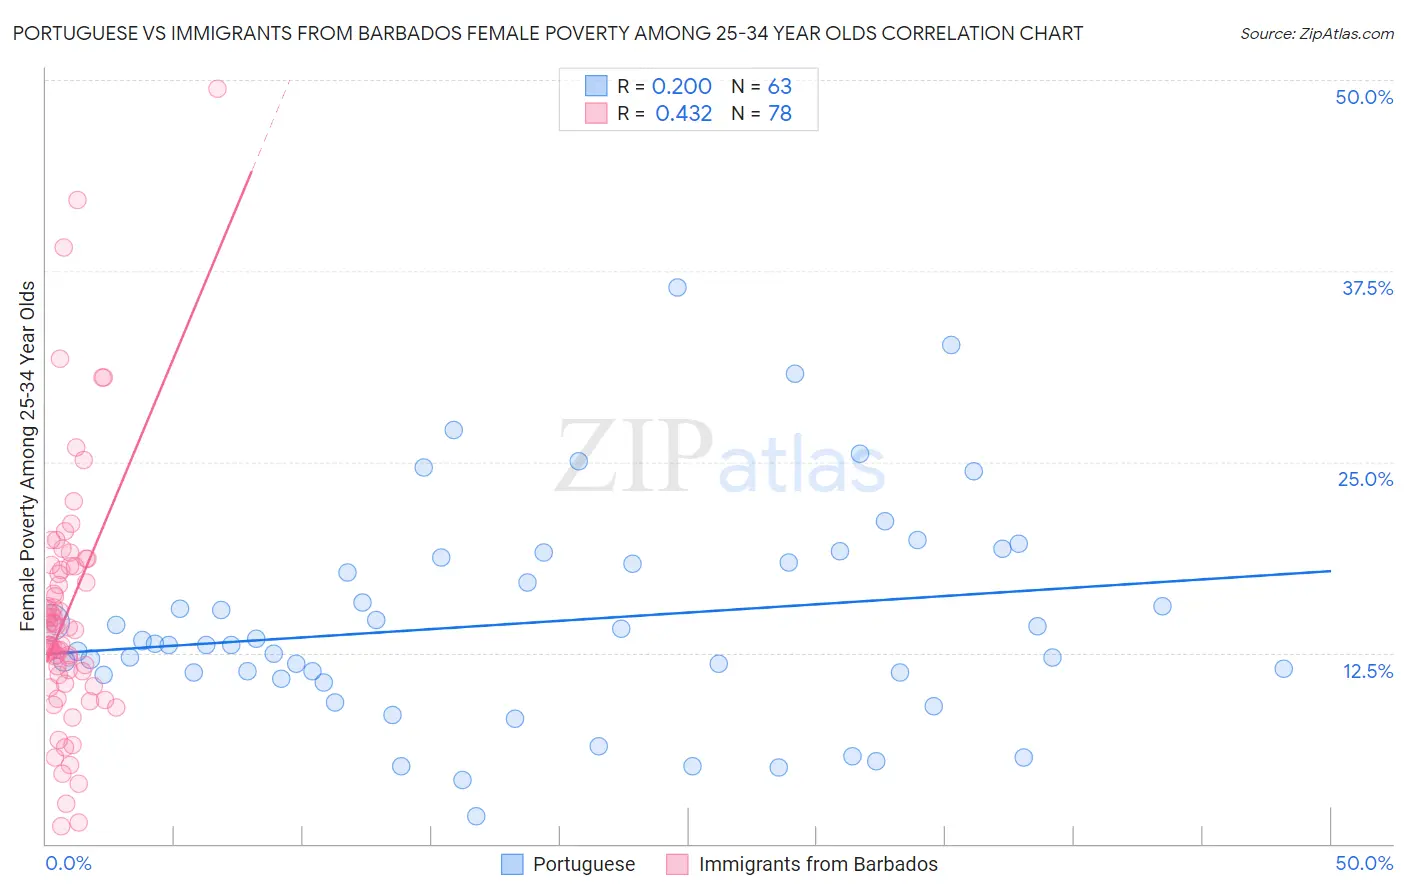 Portuguese vs Immigrants from Barbados Female Poverty Among 25-34 Year Olds